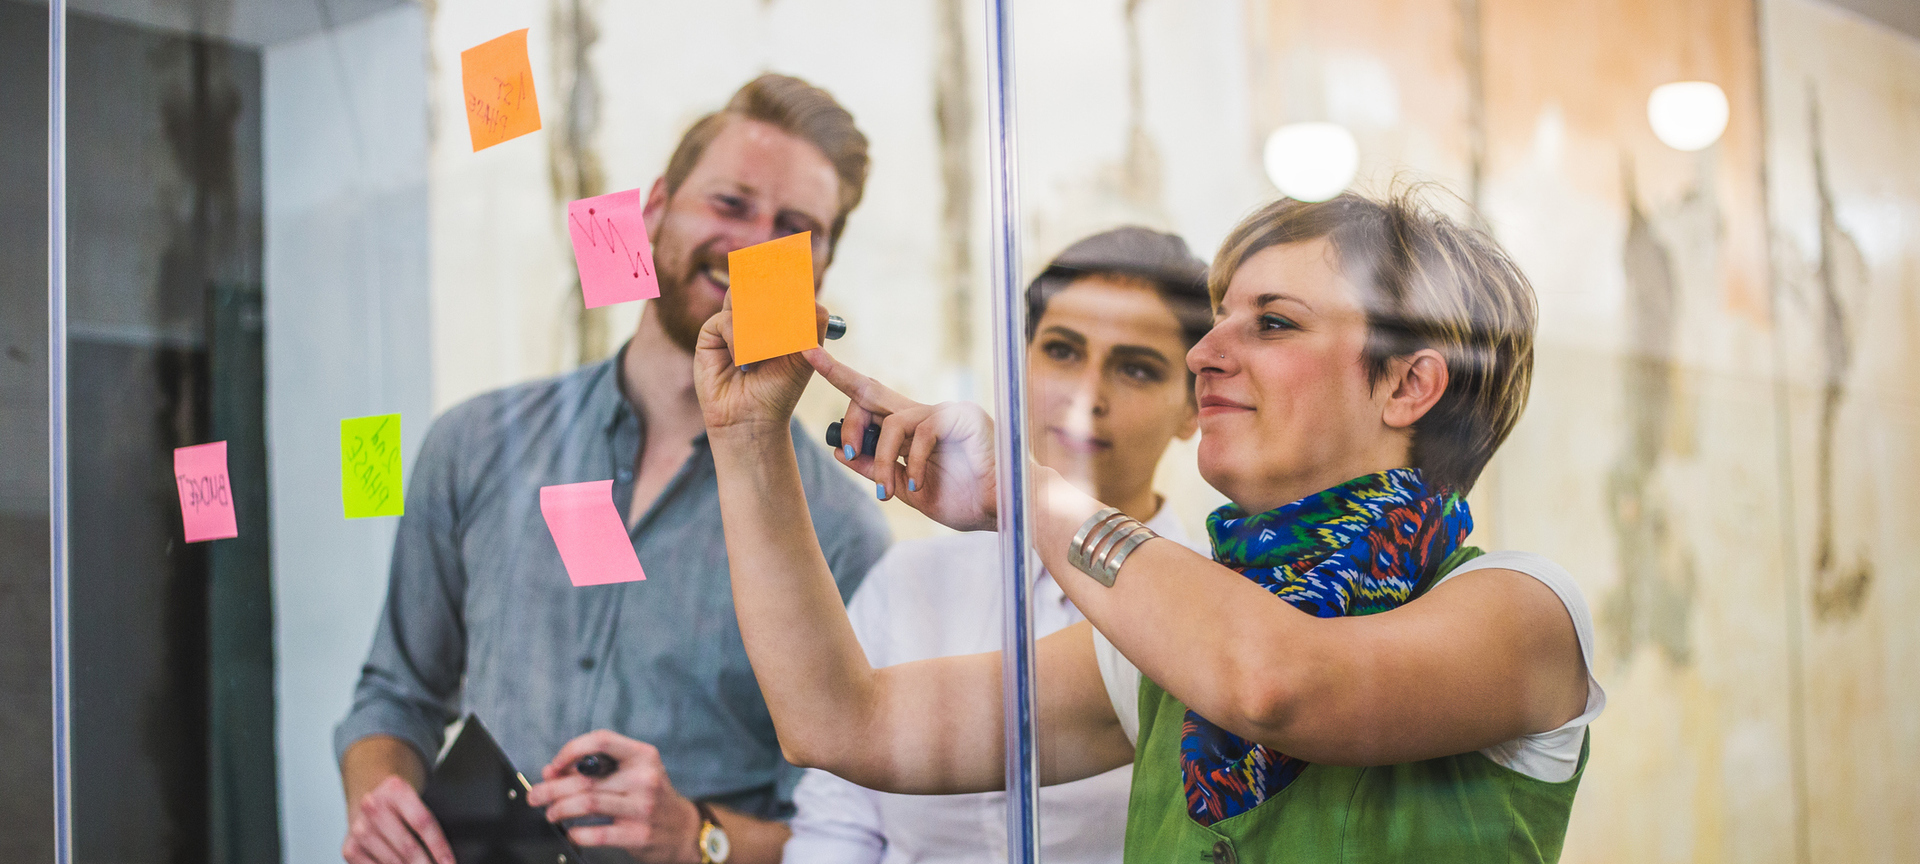 Young creative business people sticking post it notes during a meeting at an office